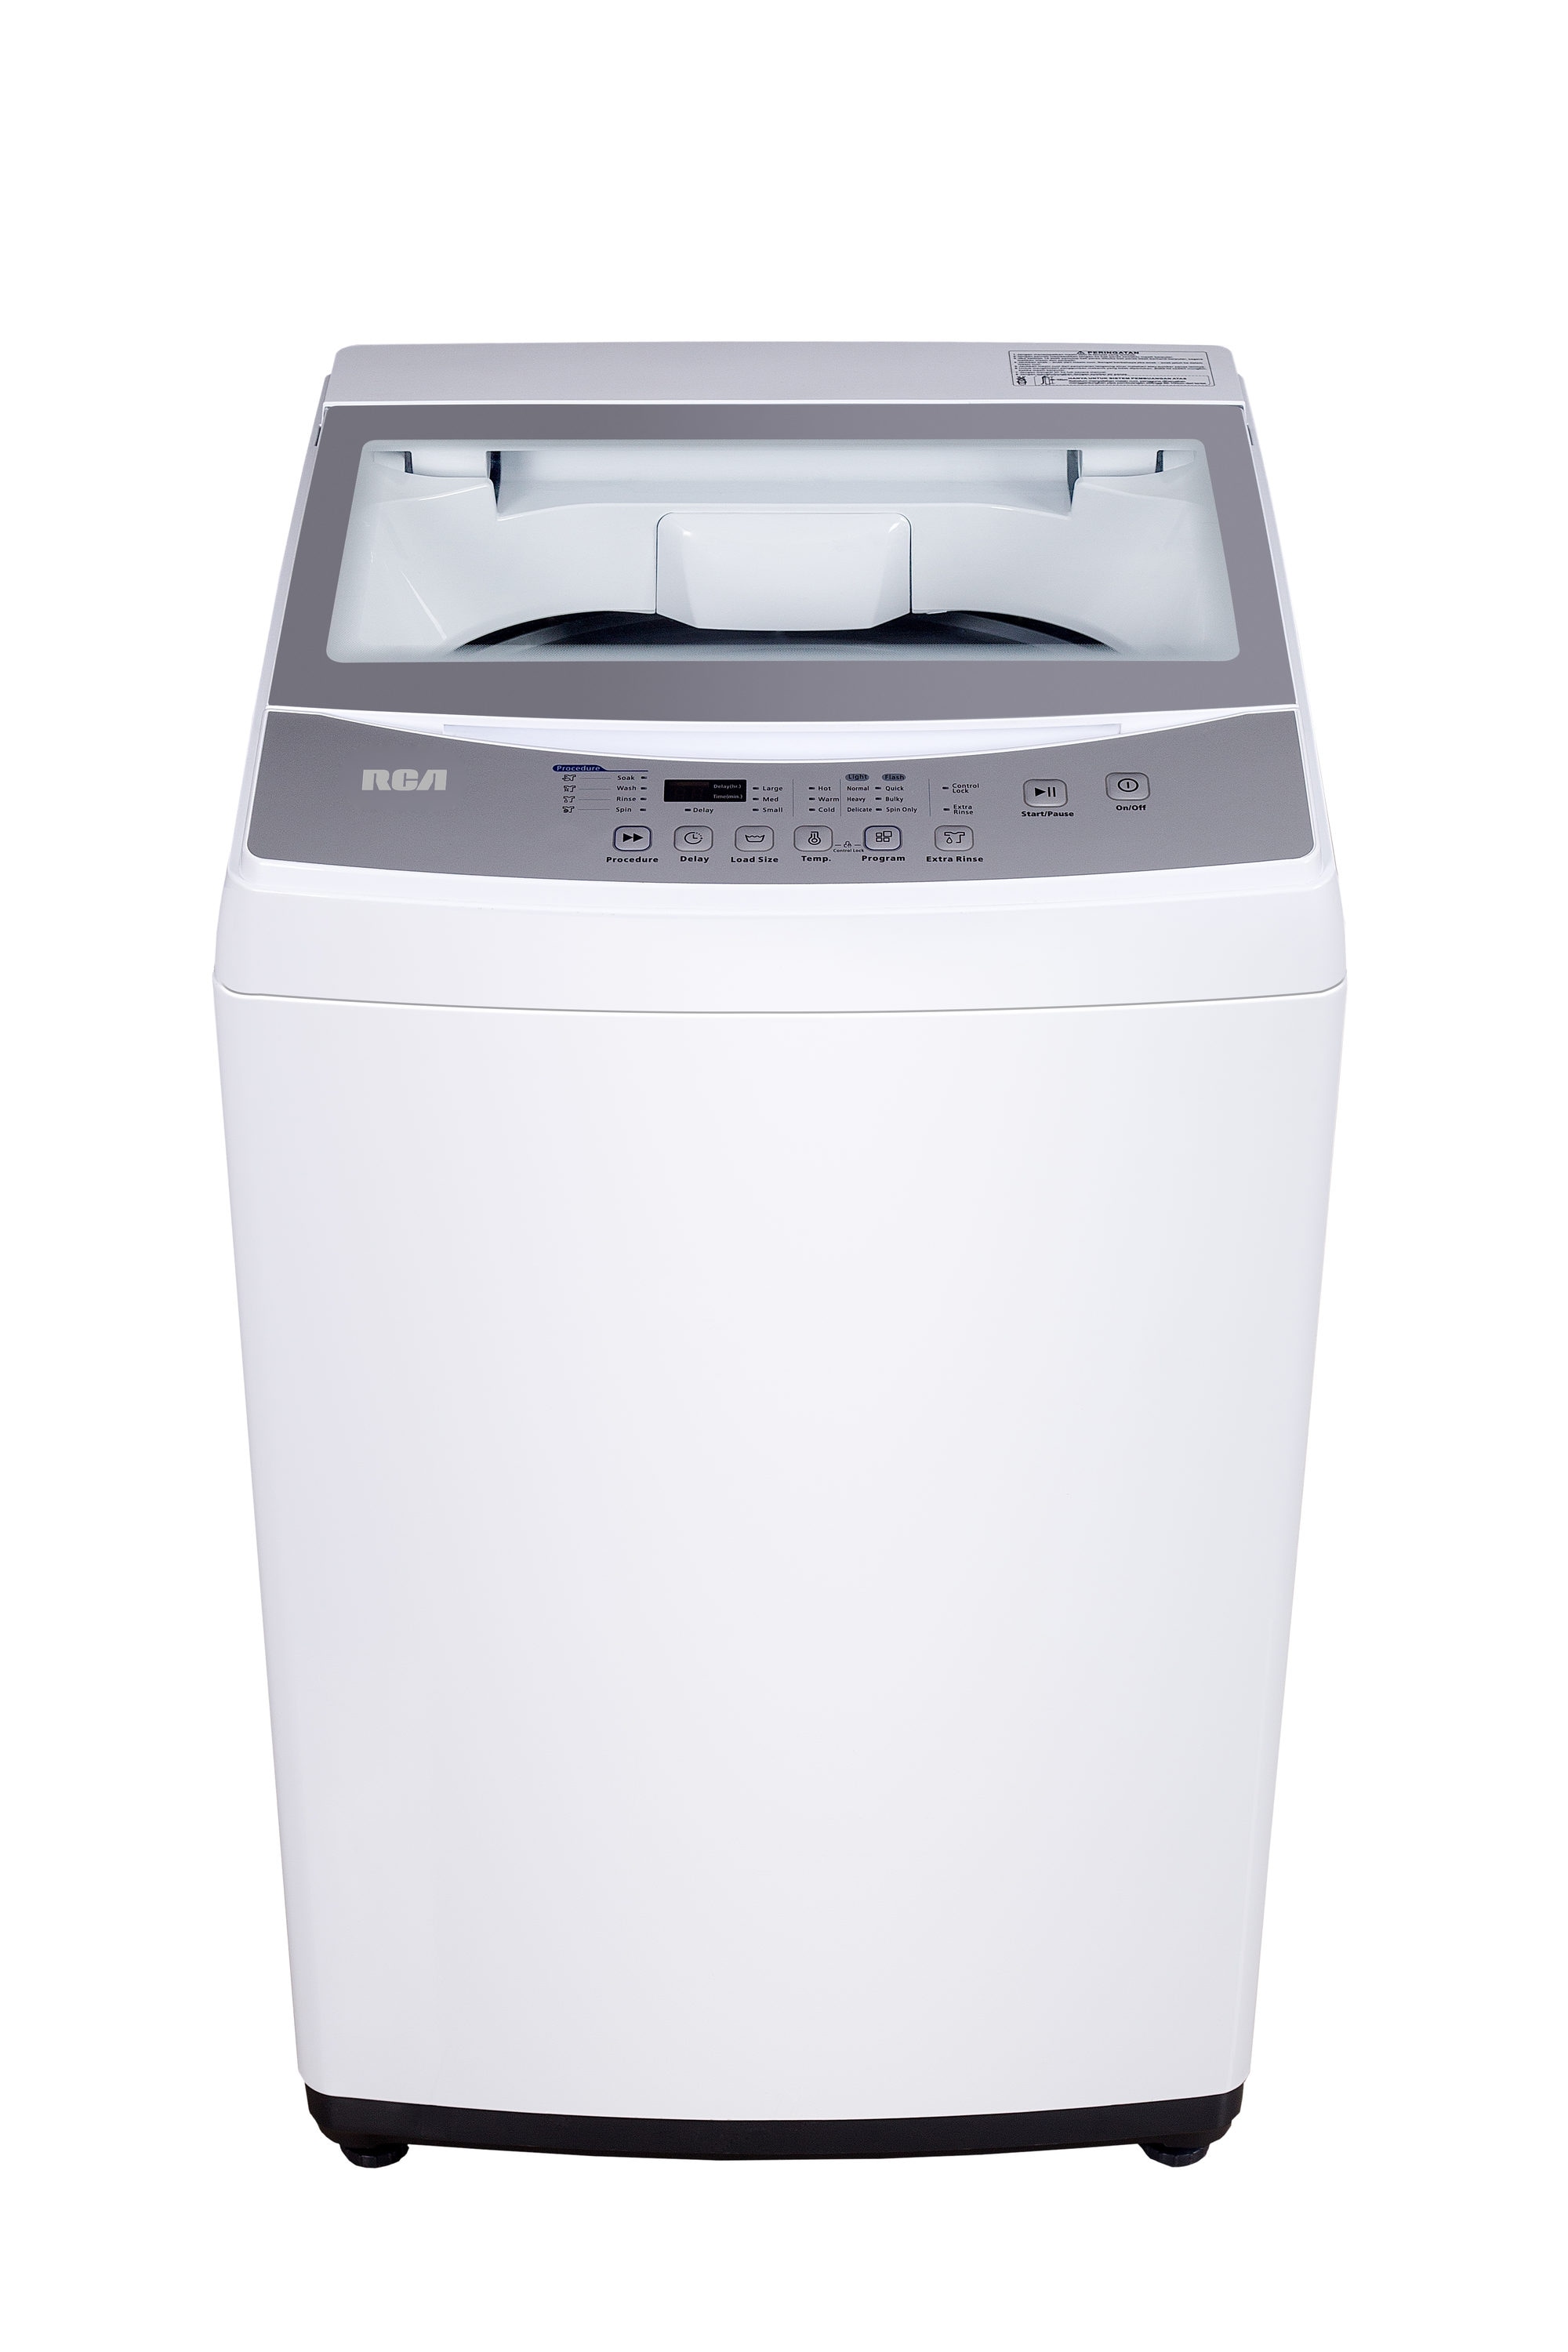 25-inch-wide-washing-machines-at-lowes